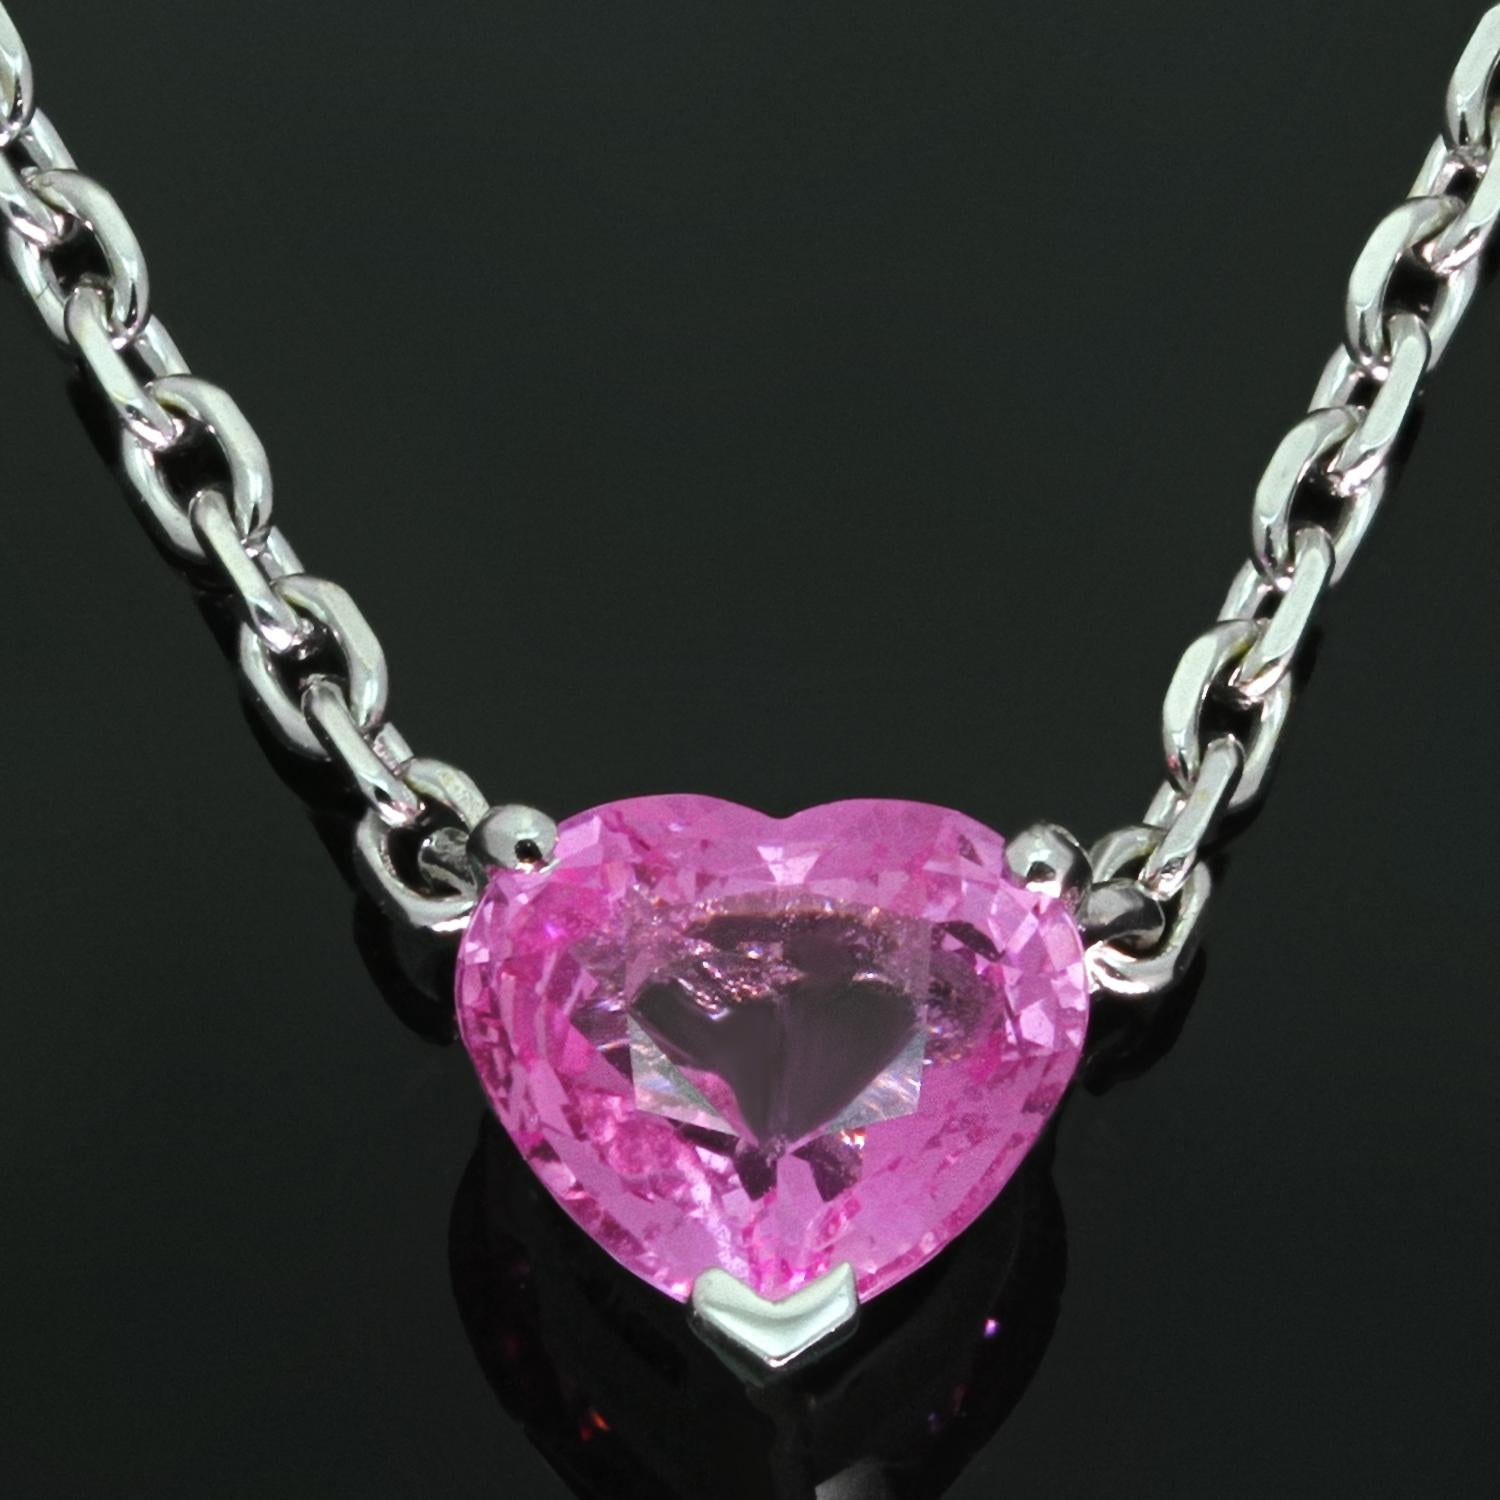 This lovely Cartier 18k white gold necklace features a heart-shaped pink sapphire pendant completed with a link chain. Made in France circa 2010s. 